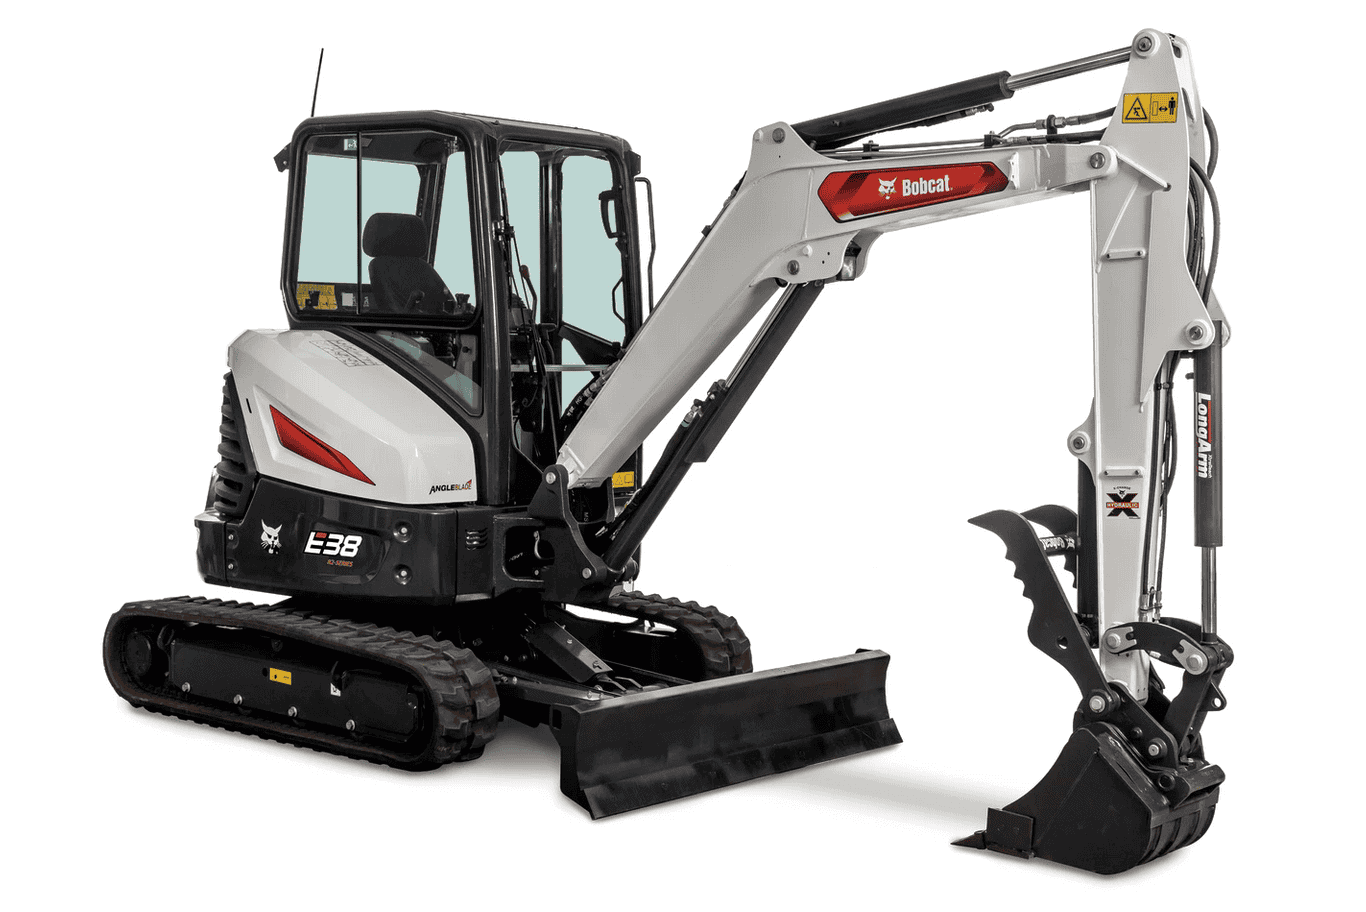 Browse Specs and more for the Bobcat E38 Compact Excavator - Bobcat of the Rockies